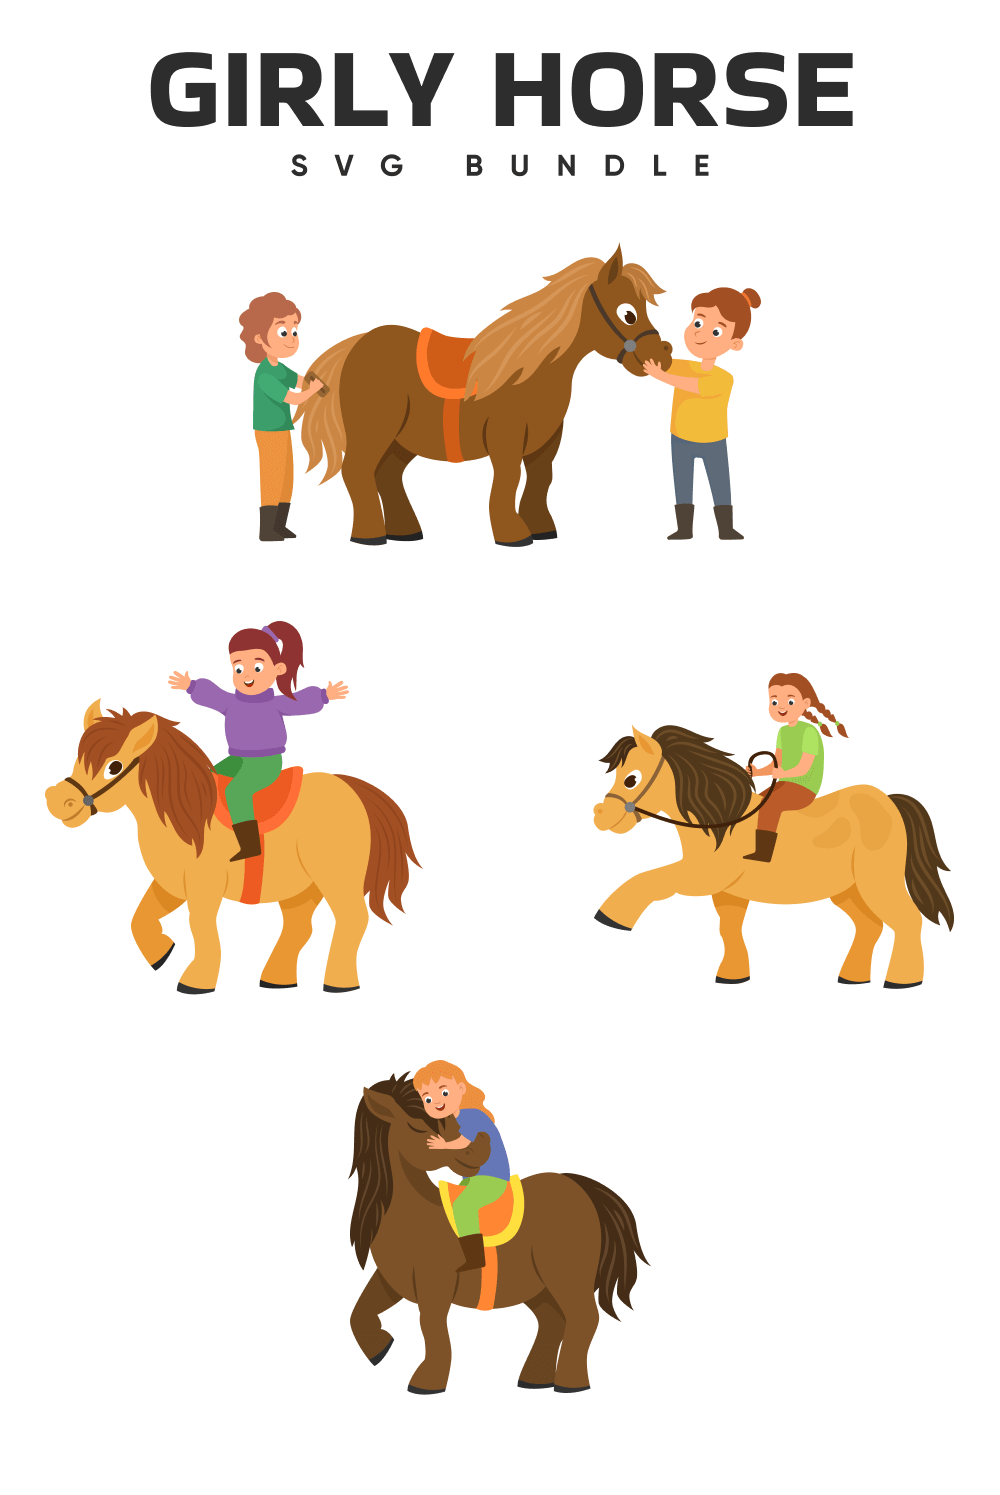 Group of people riding horses on a white background.